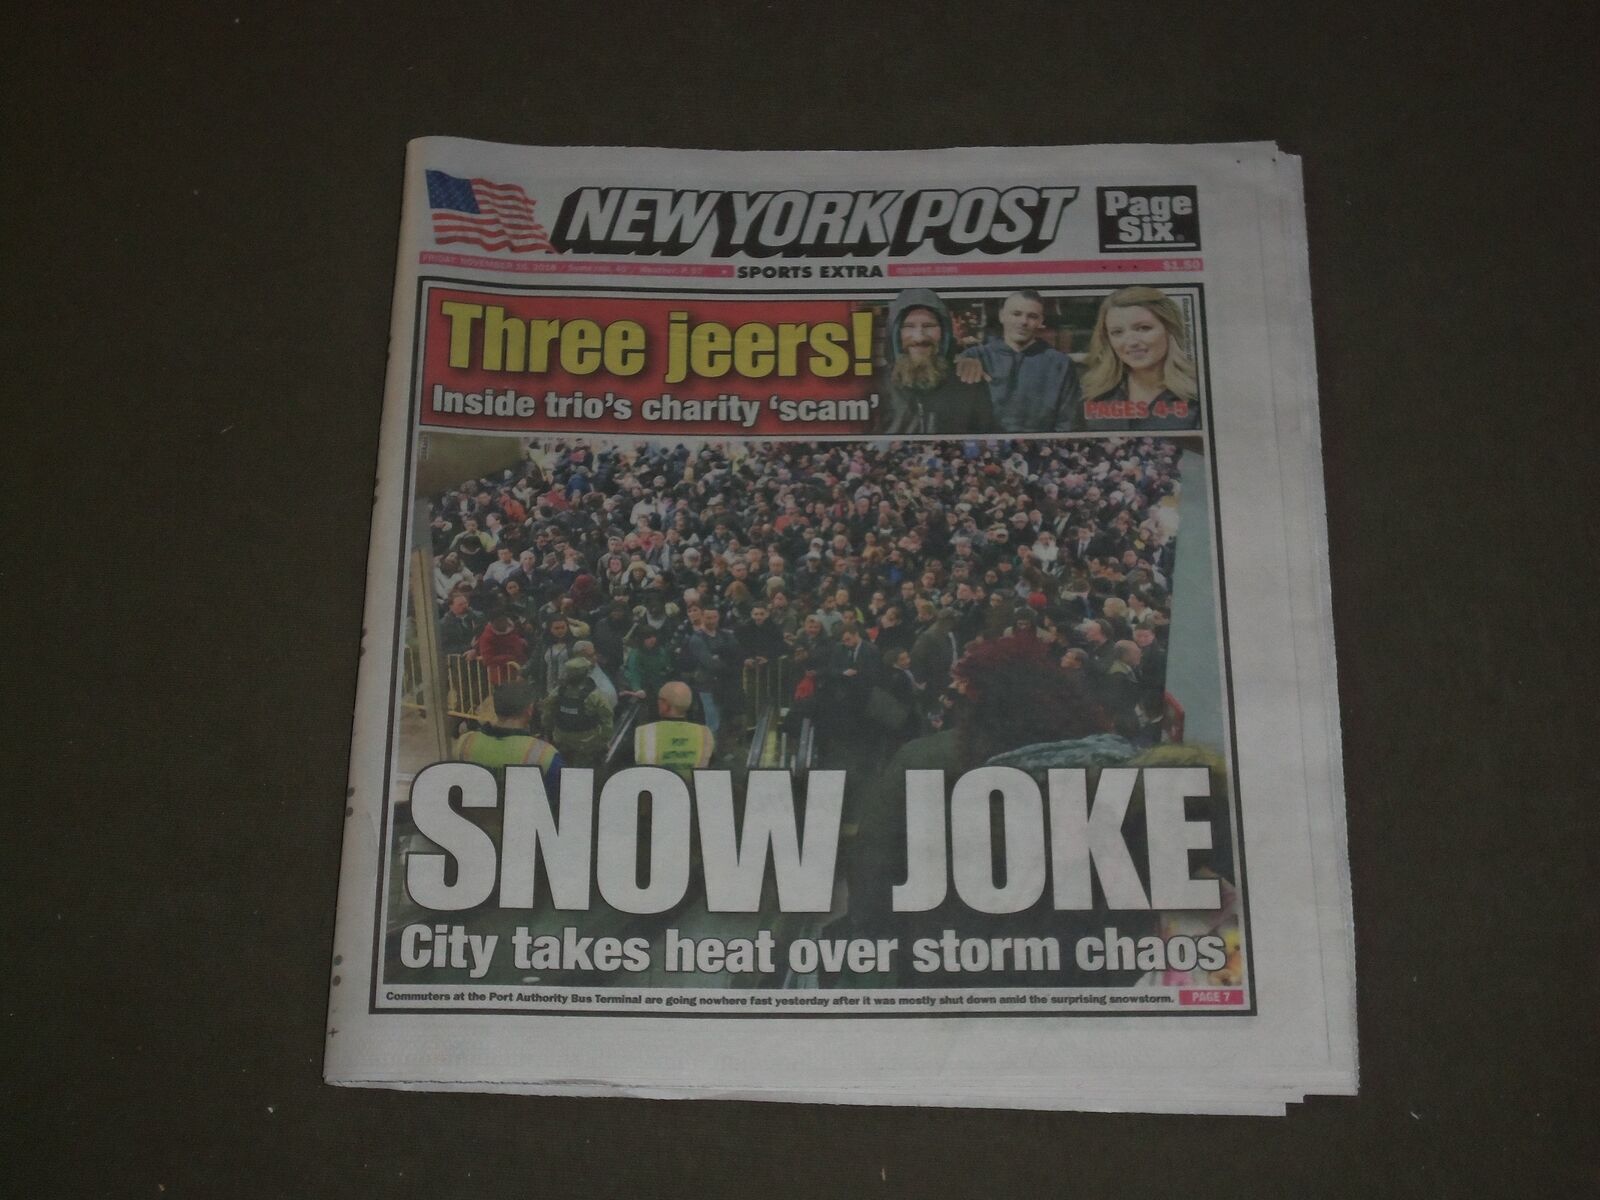 2018 NOVEMBER 16 NEW YORK POST NEWSPAPER - NYC TAKES HEAT OVER SNOW STORM CHAOS